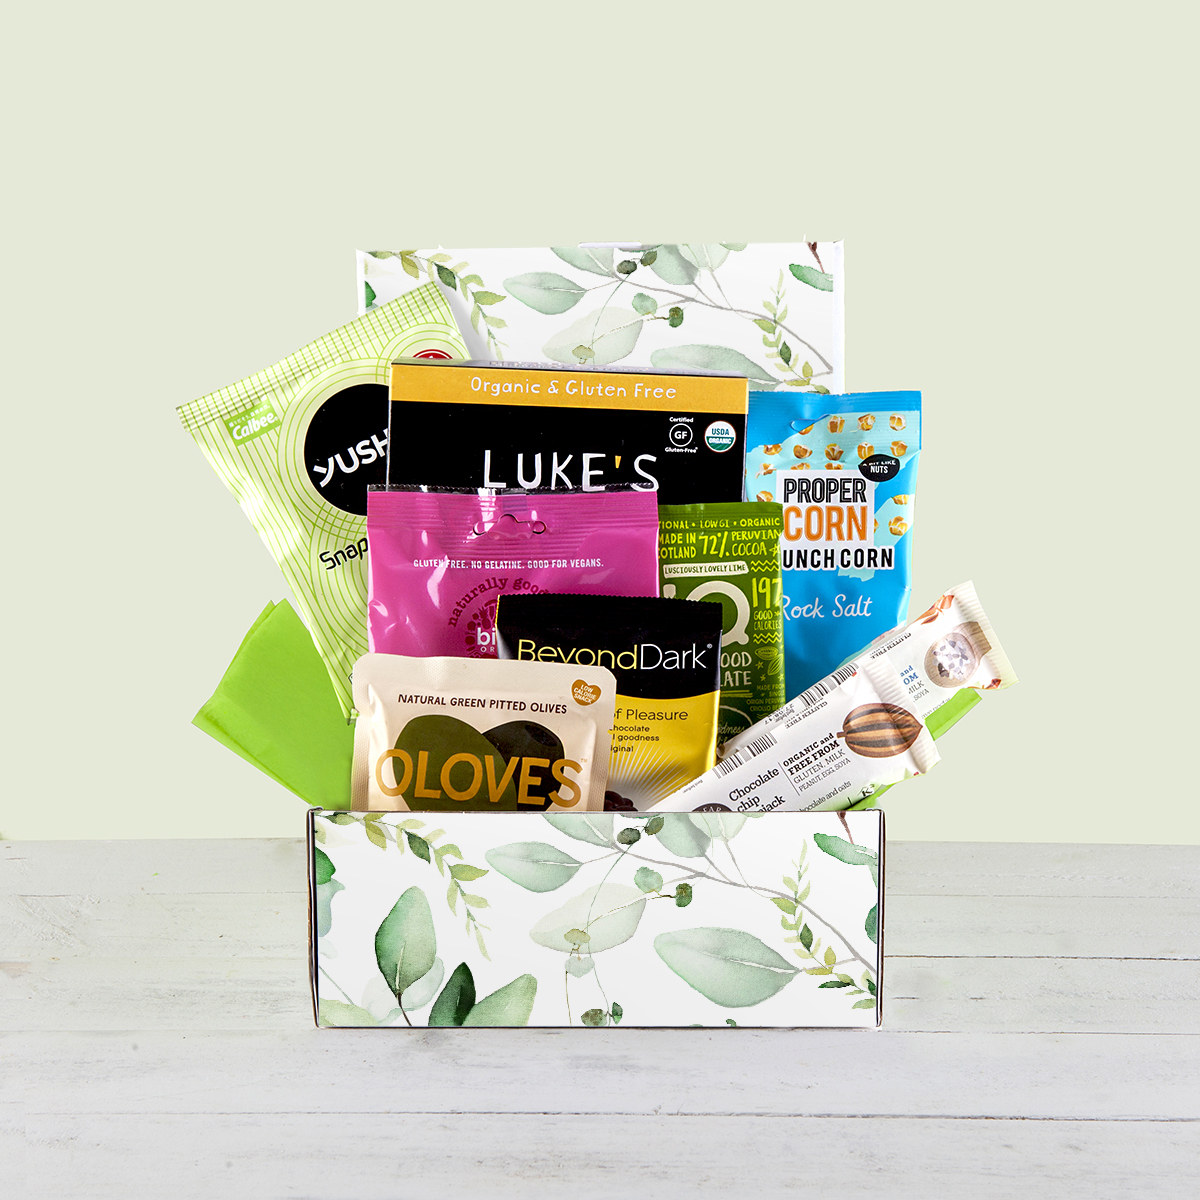 'Don't go Nuts' Nut-Free Snack Box